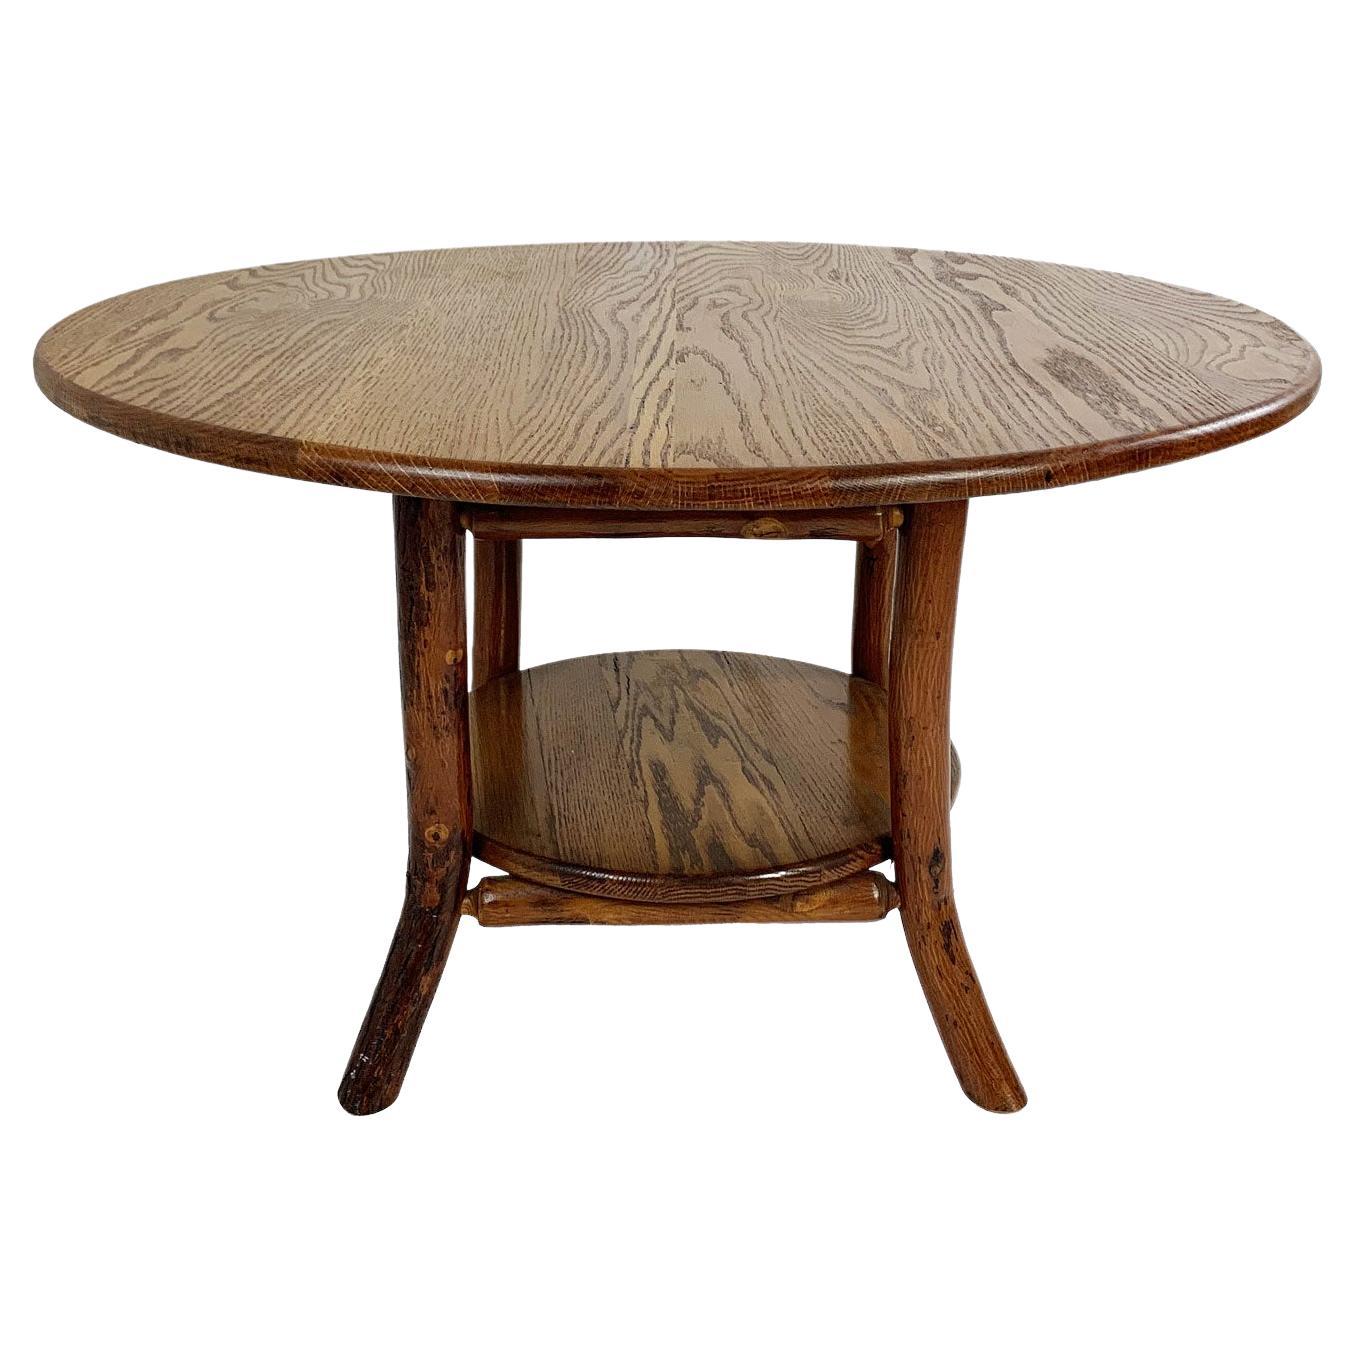 Table basse/table de cocktail Old Hickory signée